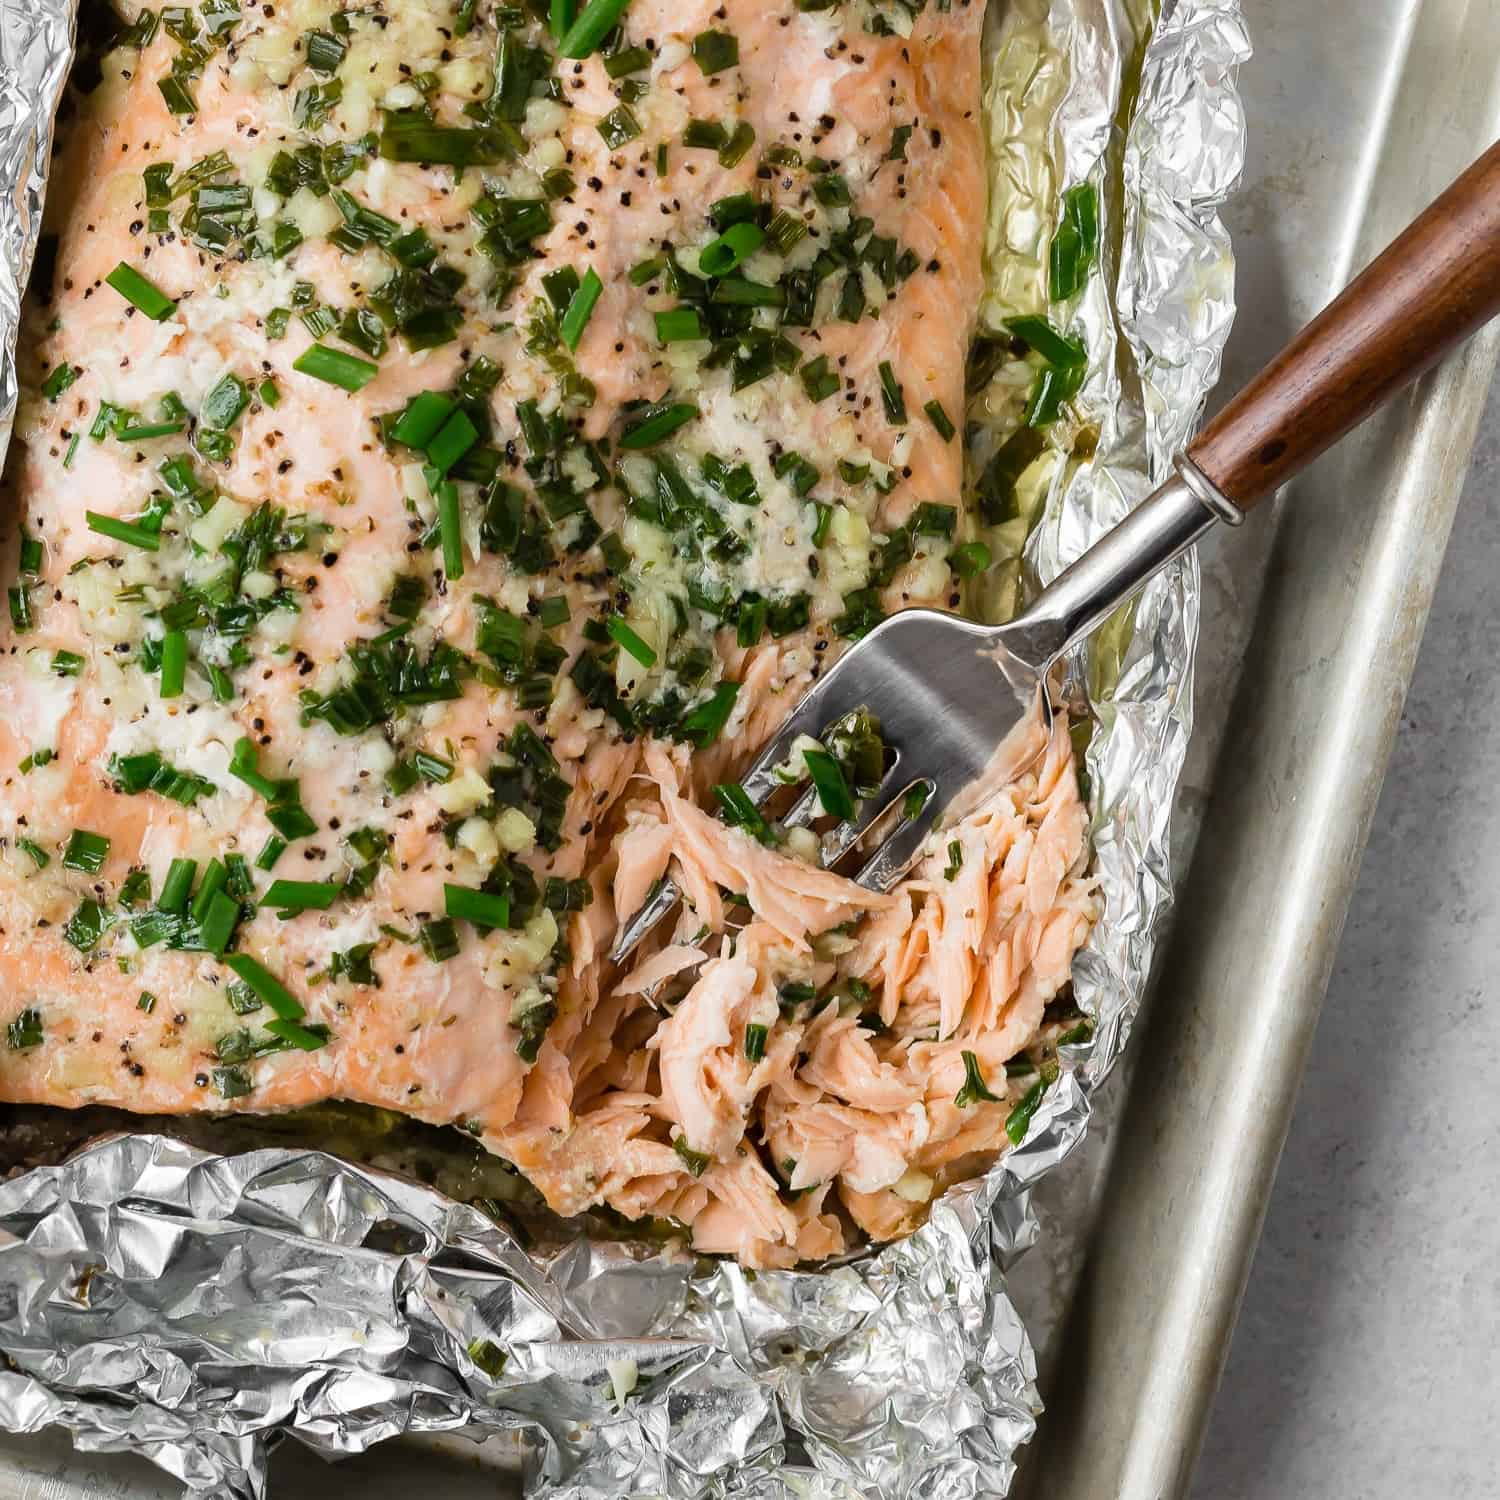 10 Foods You Might Want To Avoid Cooking In Aluminum Foil